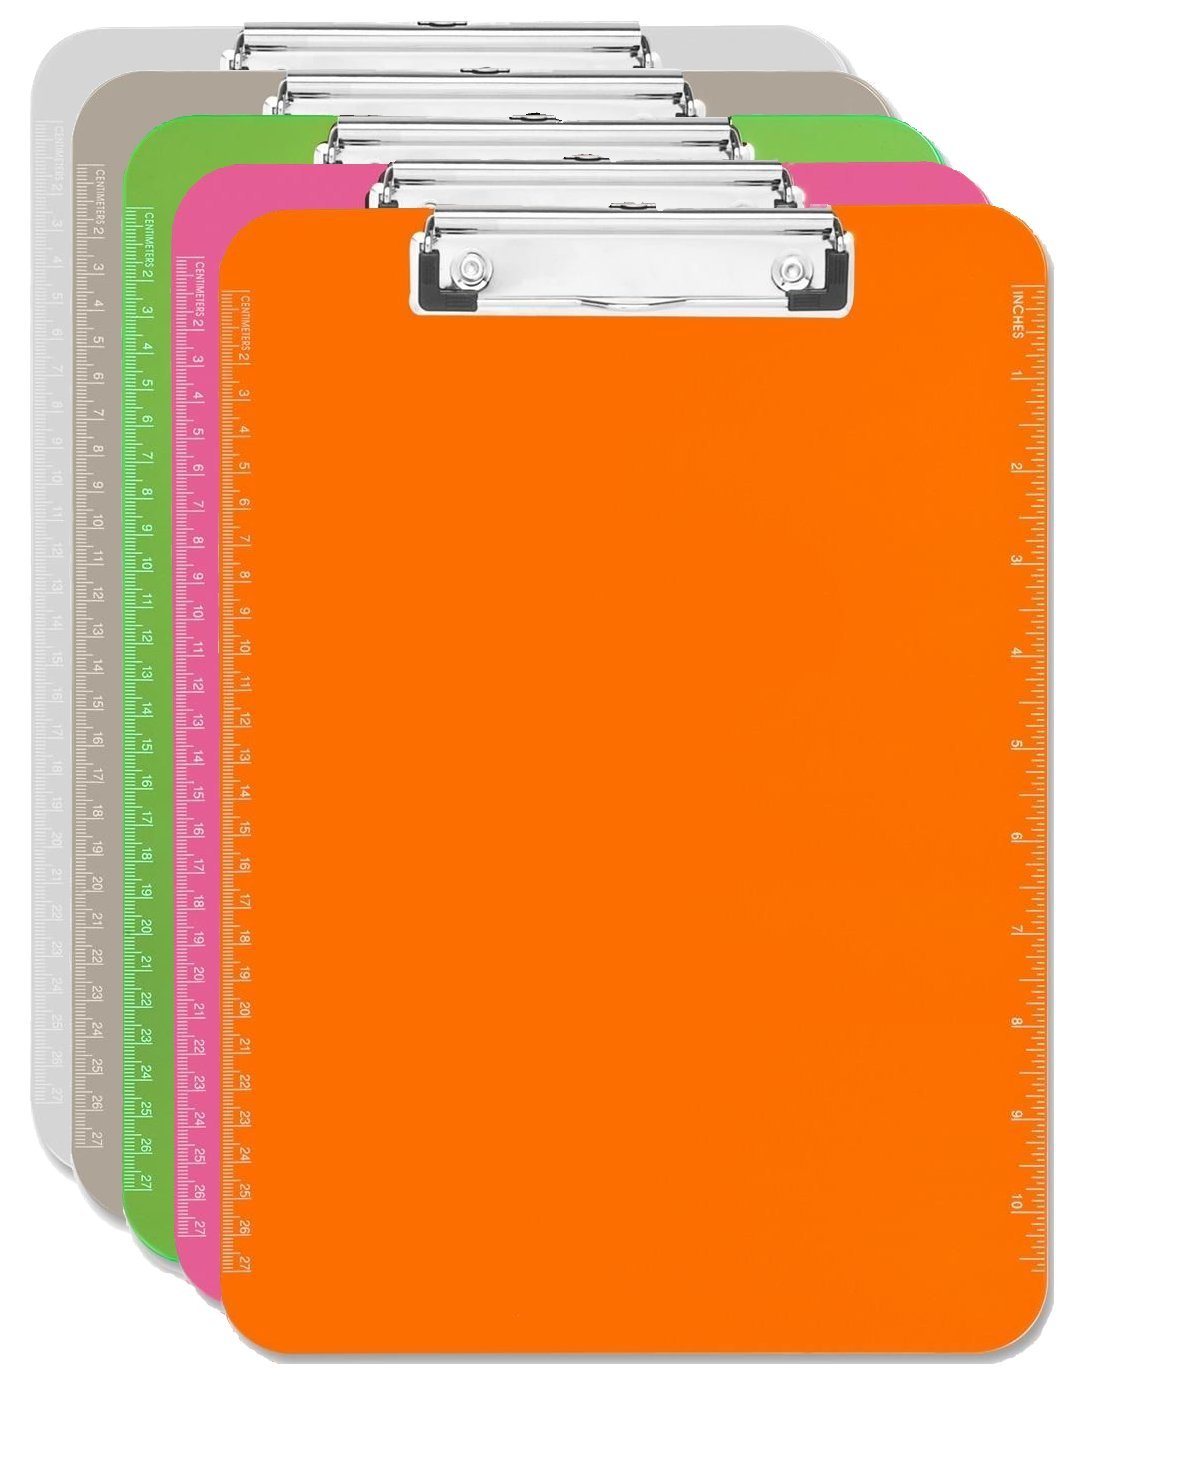 China supplier new fashionable popular custom colorful A4 waterproof medical plastic clipboard with metal clip